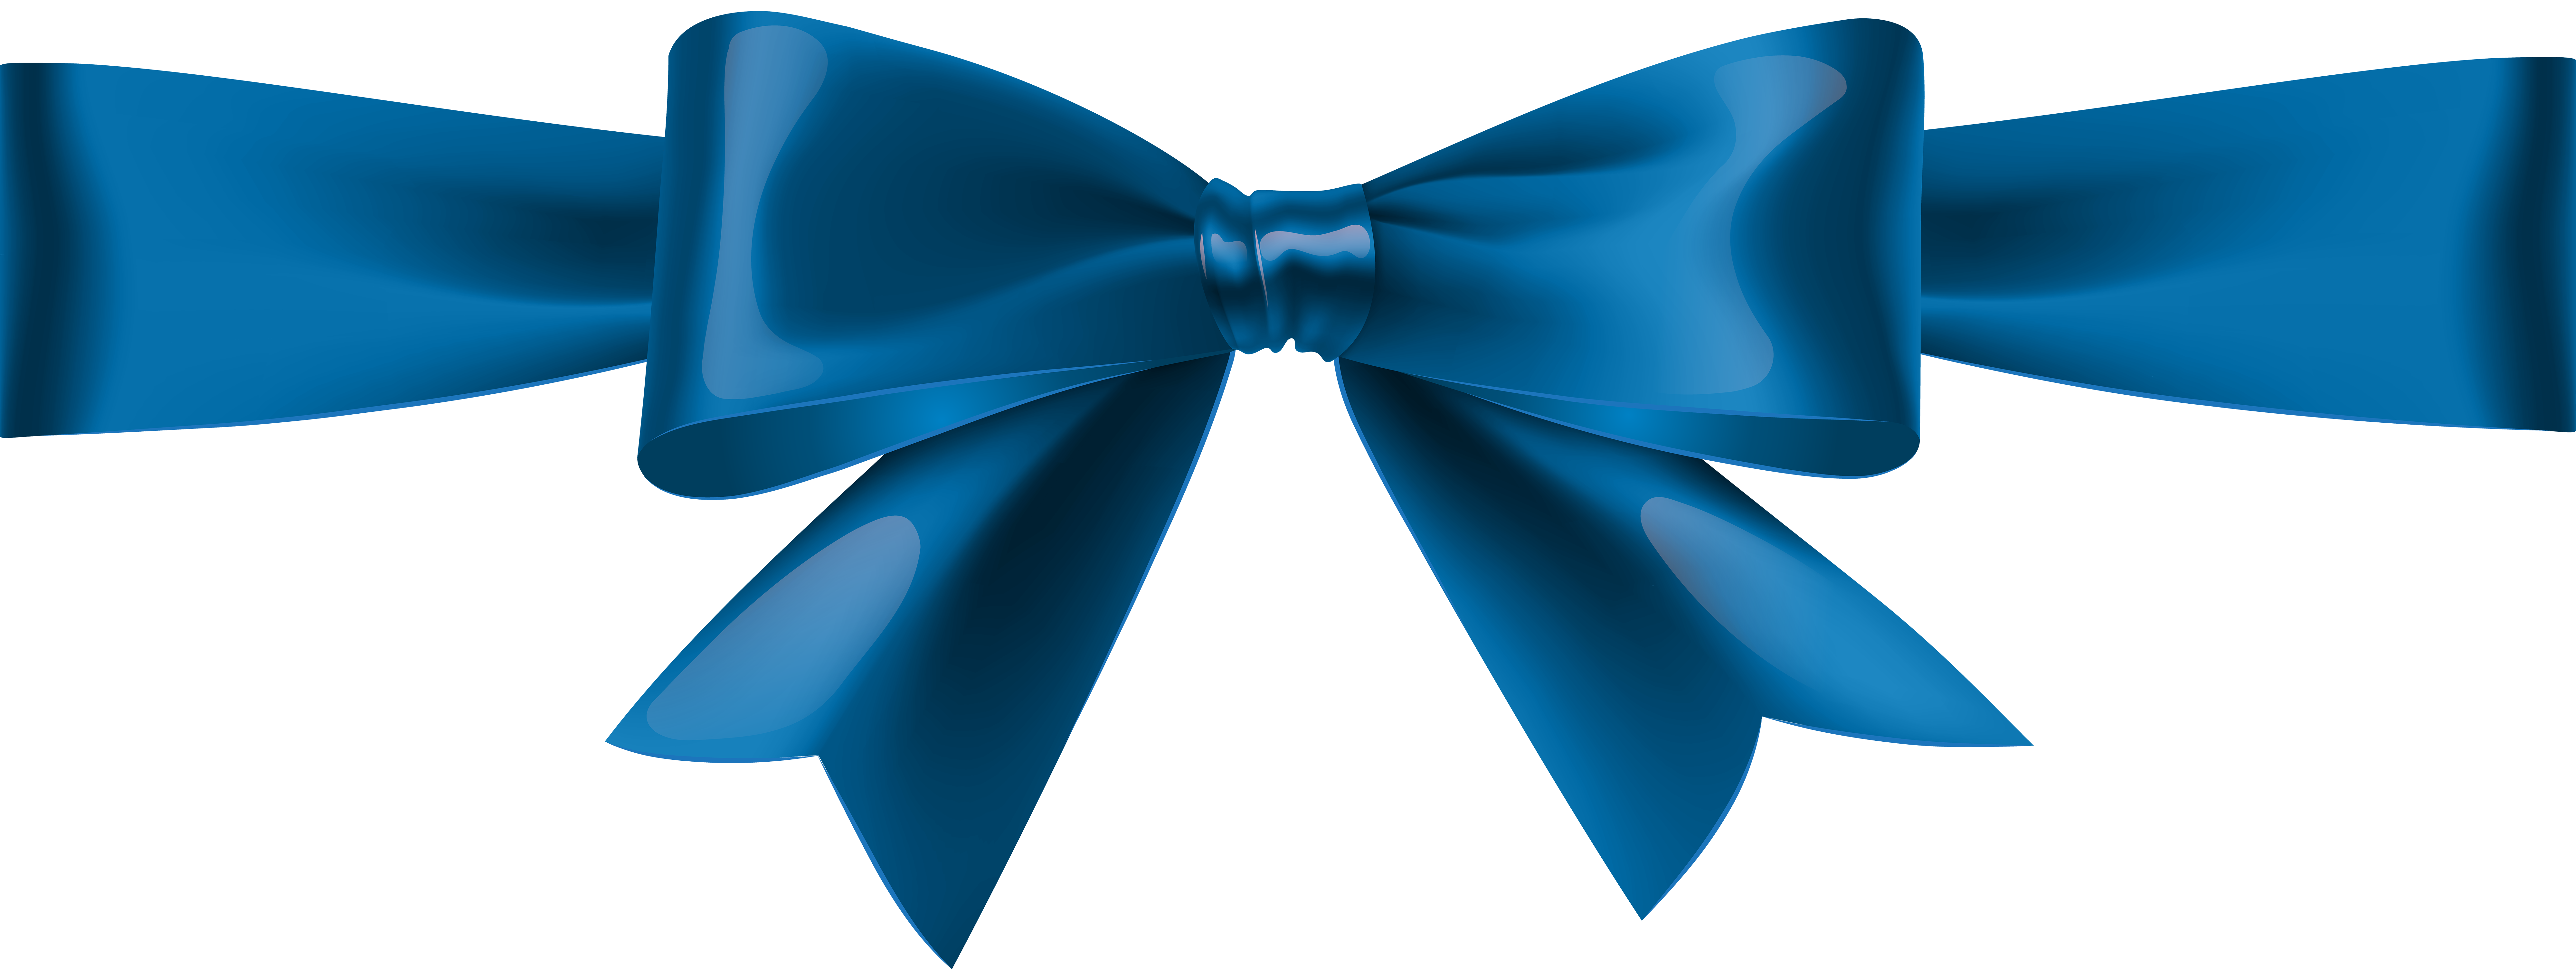 Blue Bow Transparent Clip Art | Gallery Yopriceville - High-Quality ...